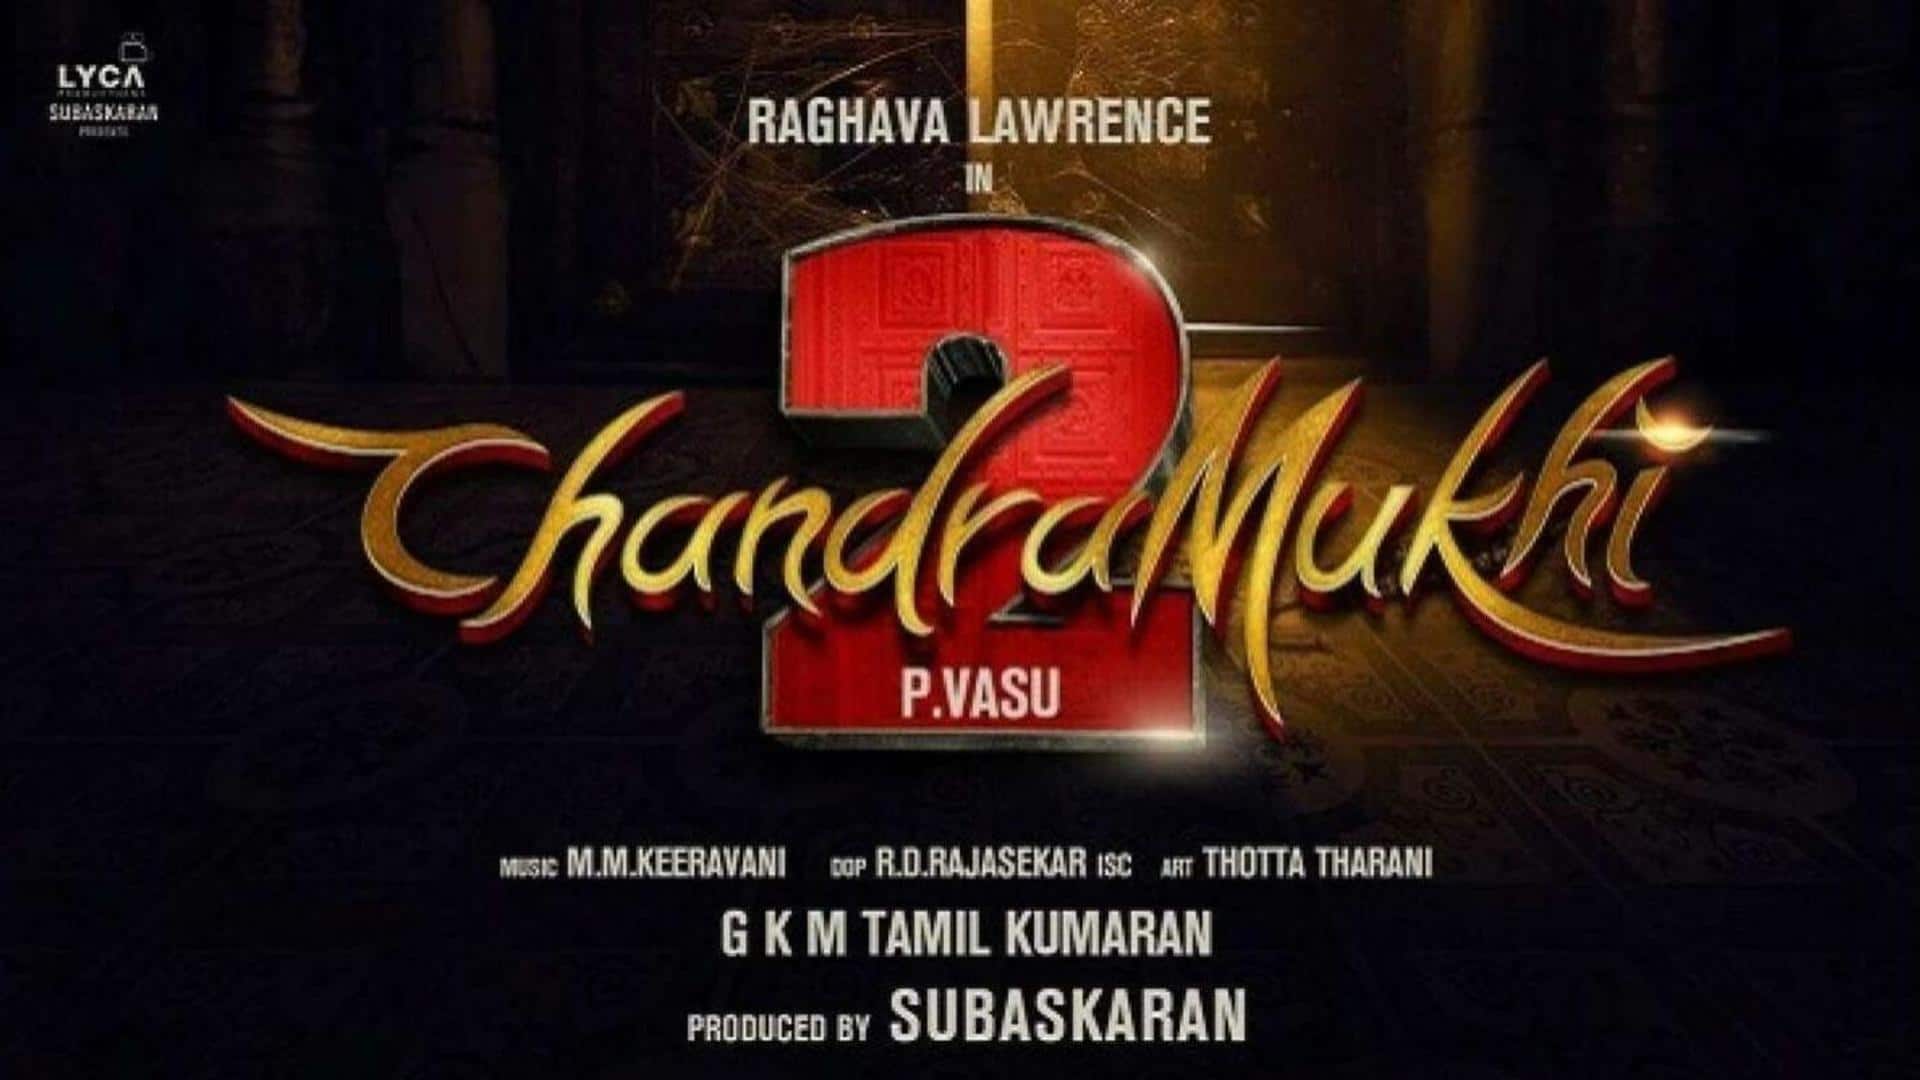 Raghava Lawrence's first look from 'Chandramukhi 2' is out